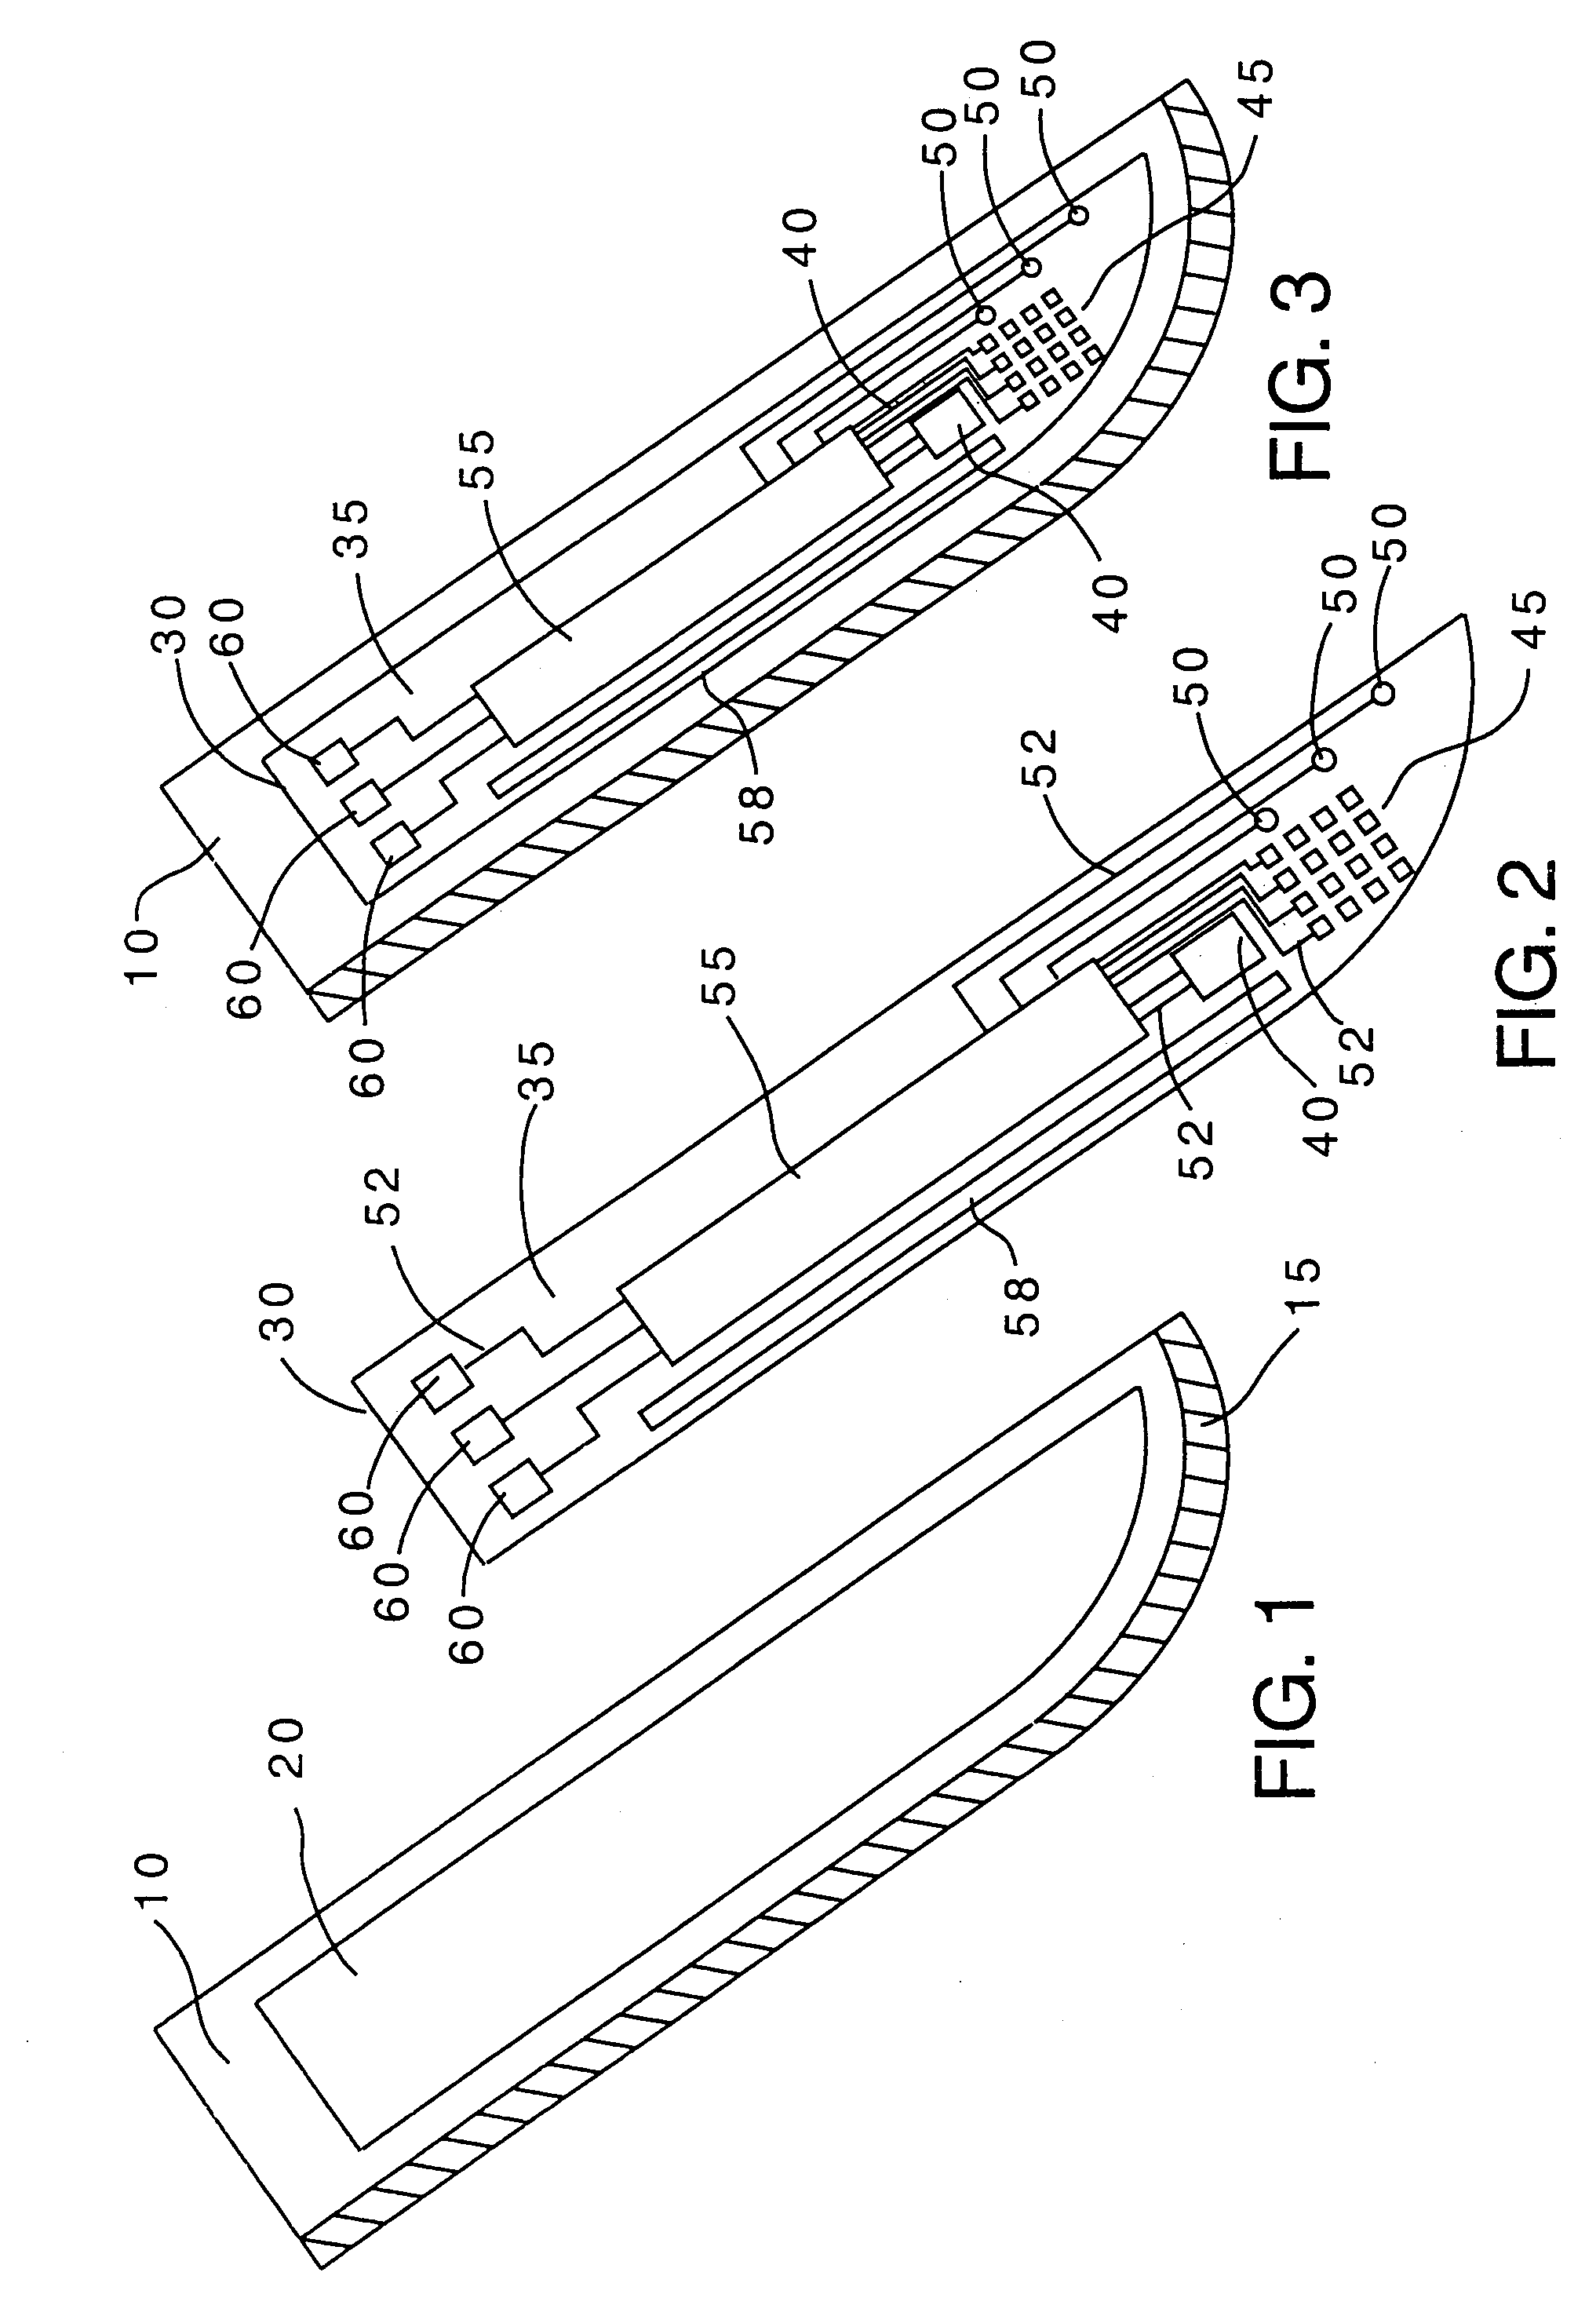 Method of making a cutting instrument having integrated sensors